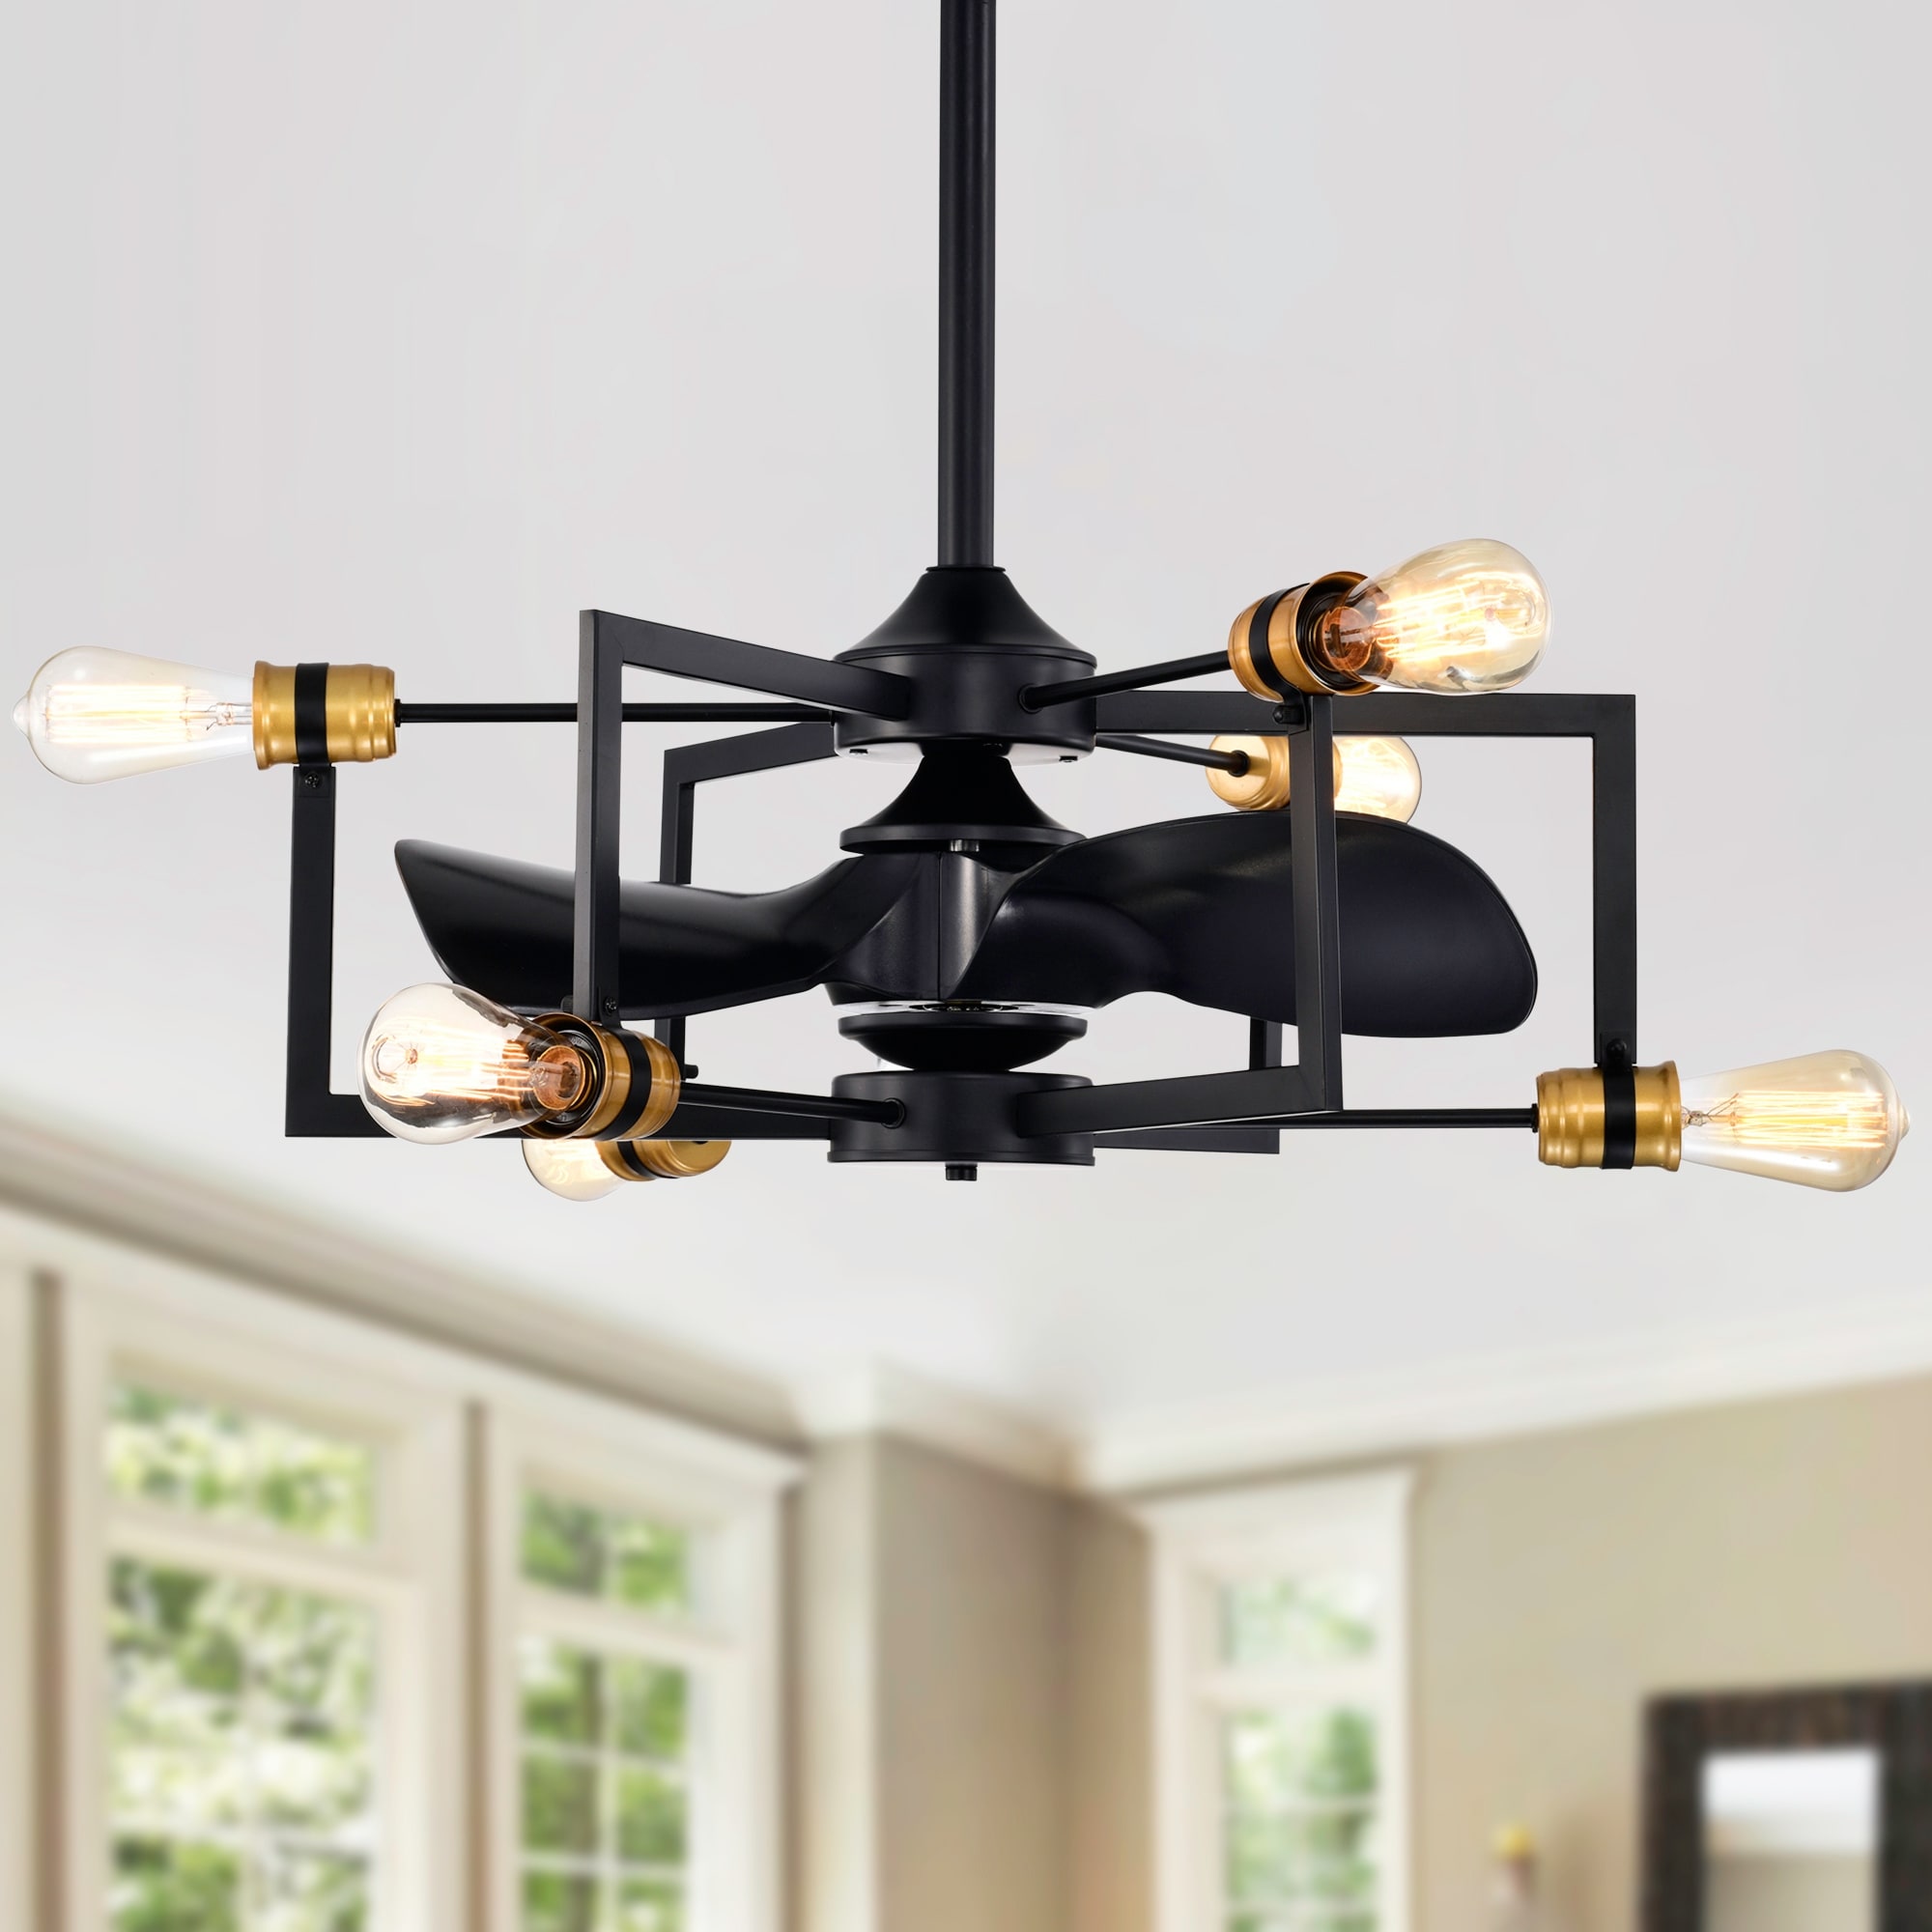 Liviana 26 Inch Oil Rubbed Matte Black finish 6 Light, 3 Blade Ceiling Fandelier with Remote